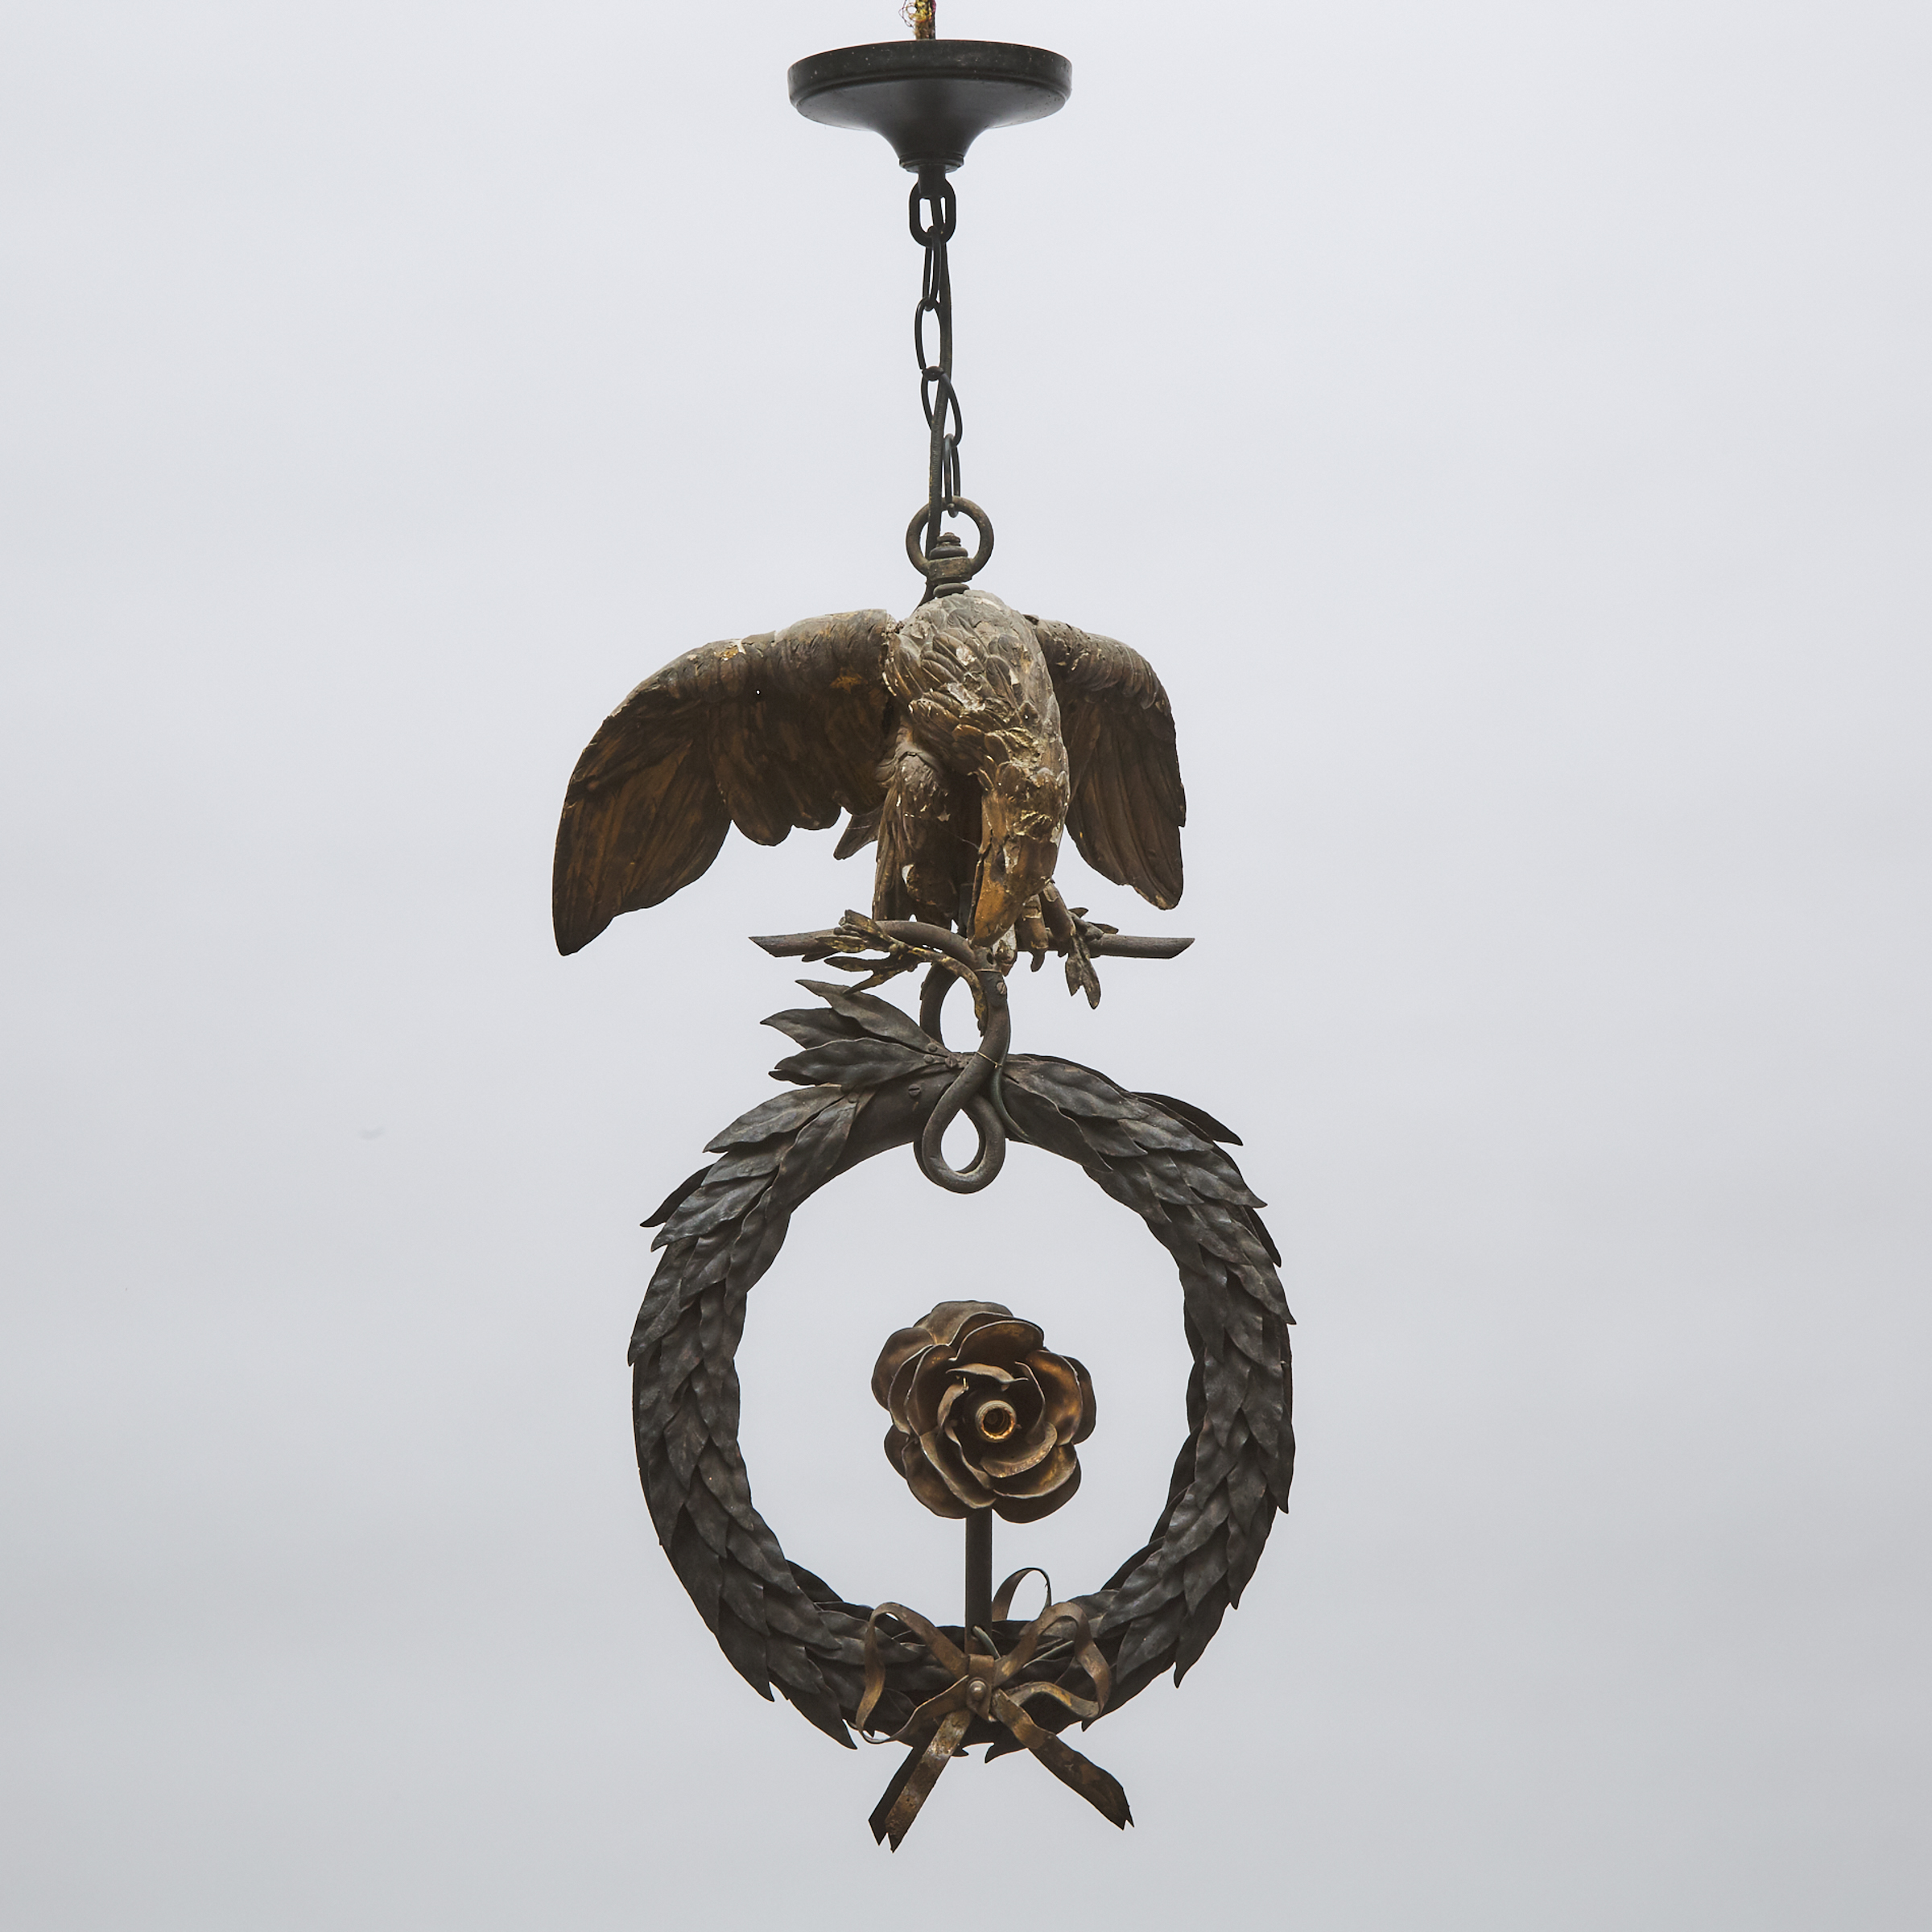 Federal Style Eagle and Wreath Form Hanging Lantern, 19th century